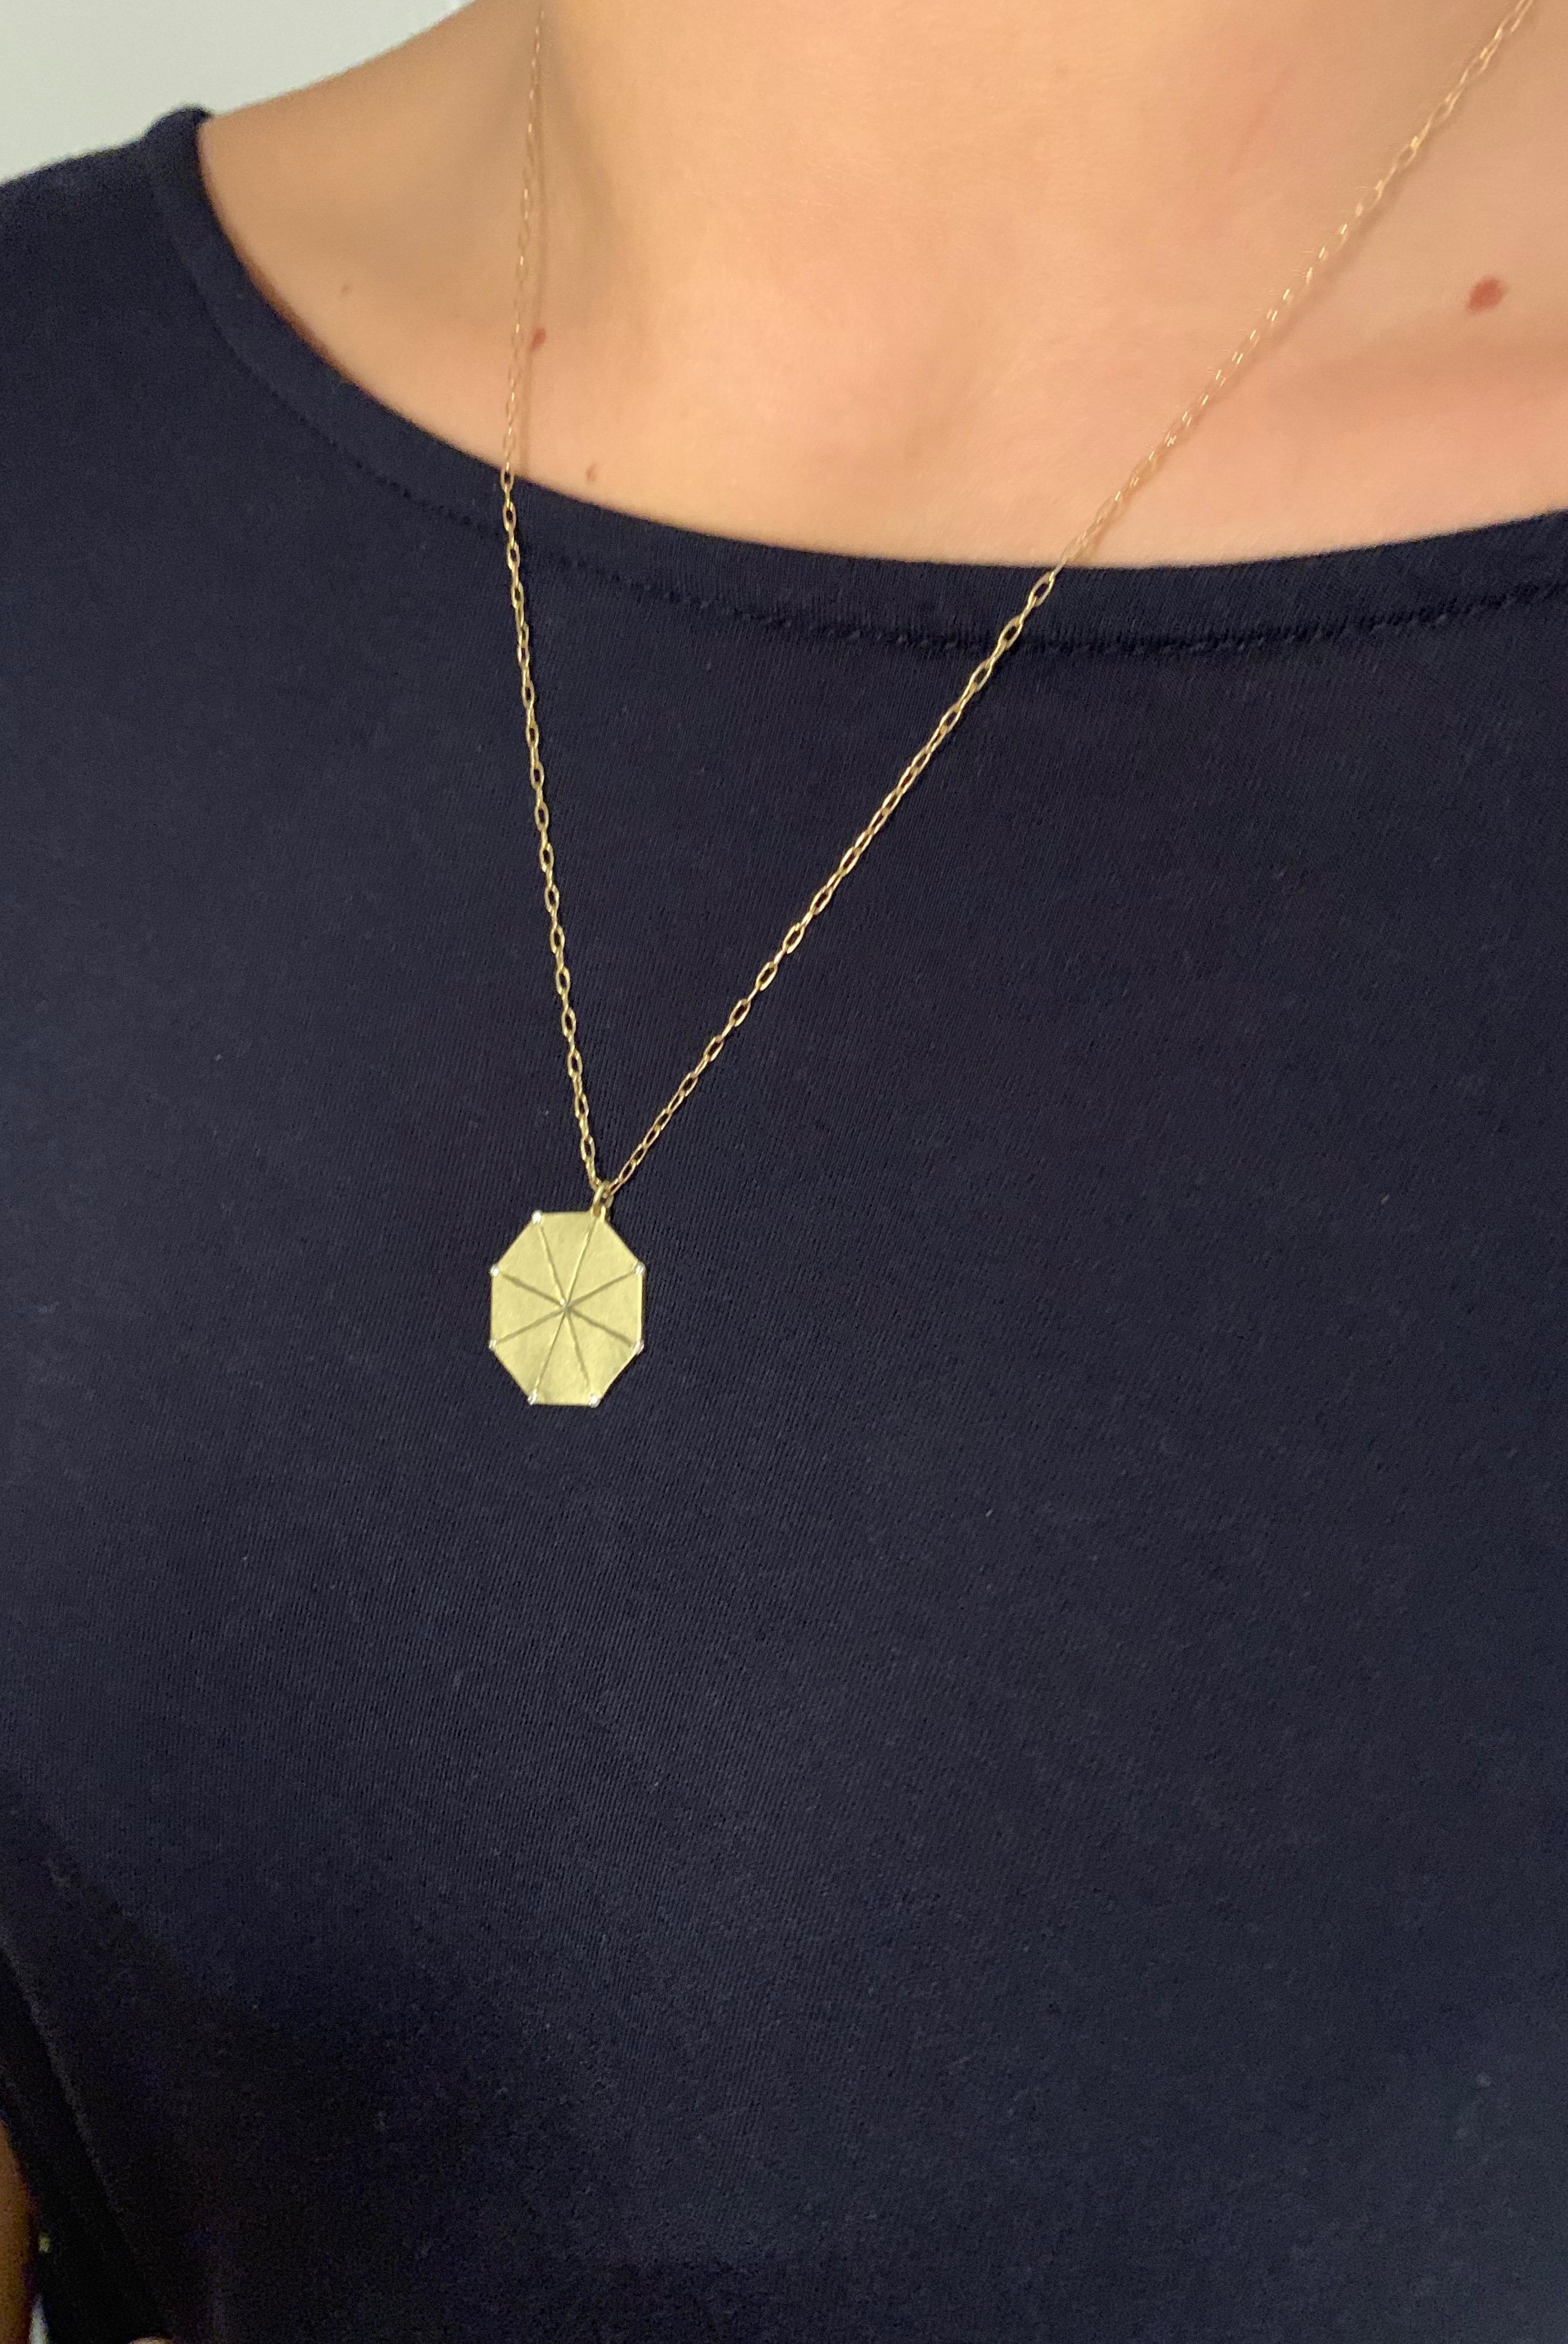 Round Cut TATE Octagon Pendant 18k Green Gold Diamond Necklace 7 Diamond Accents Chain For Sale